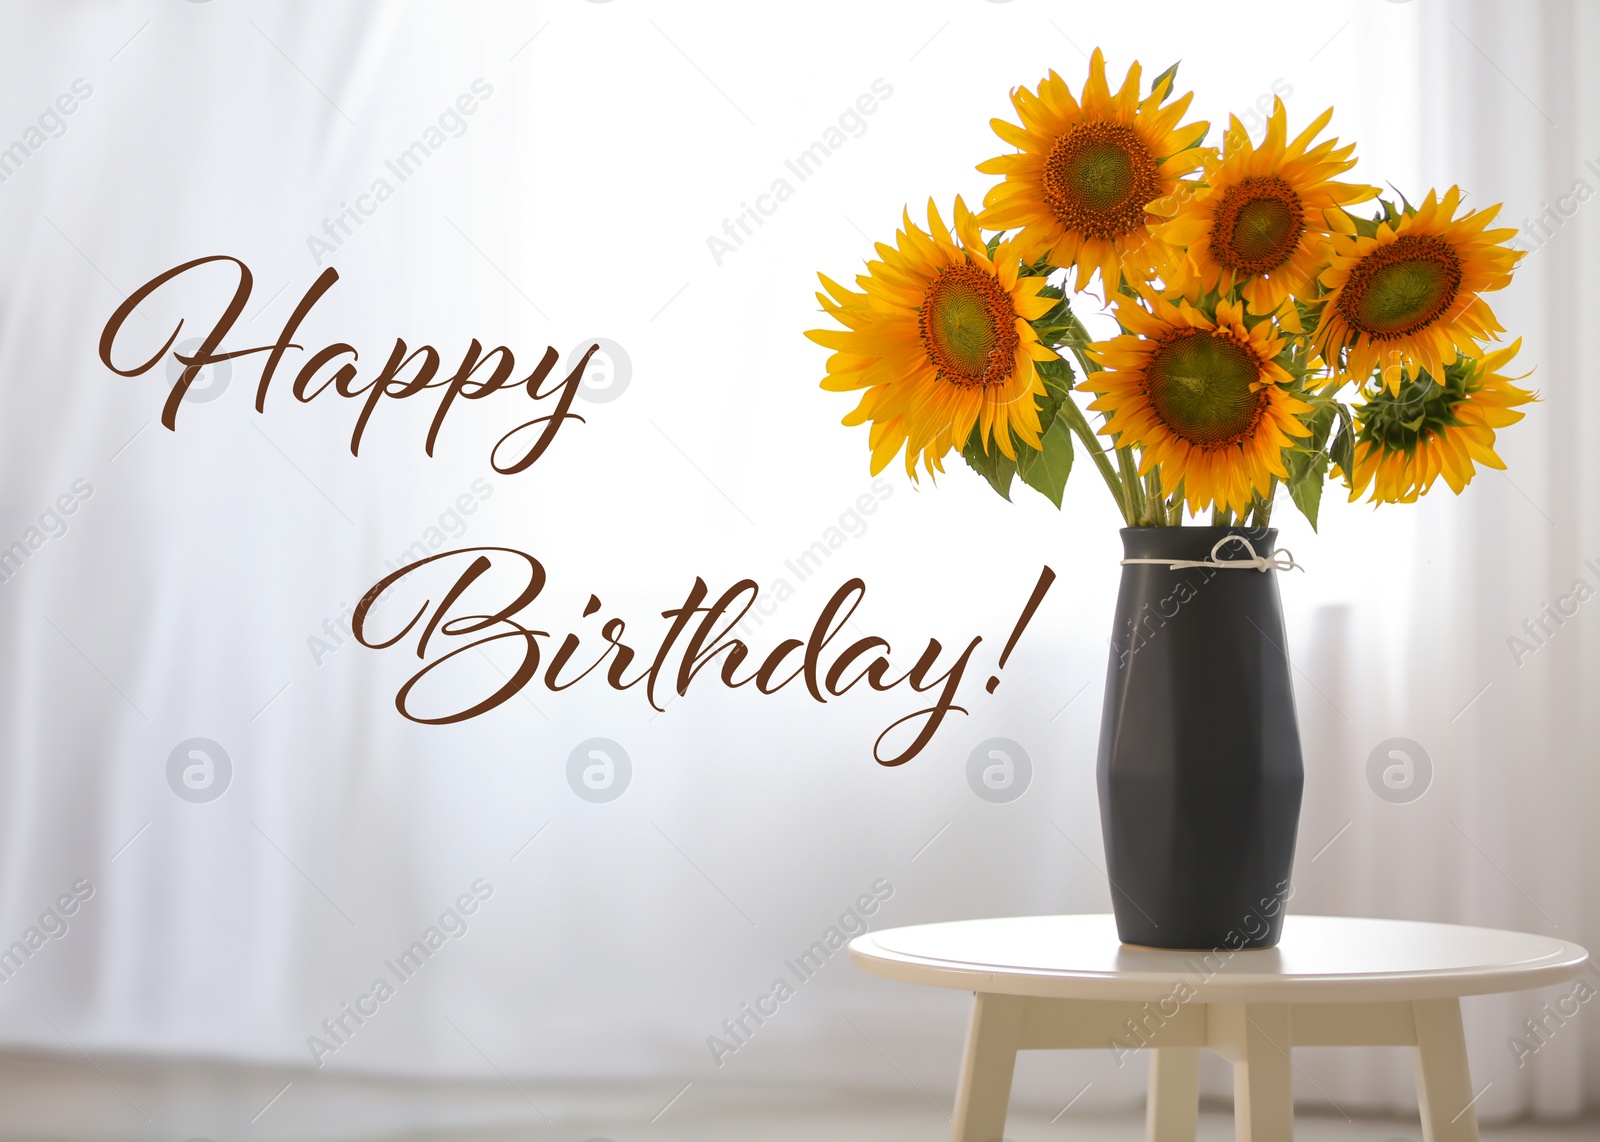 Image of Happy Birthday! Vase with beautiful yellow sunflowers on table in room 